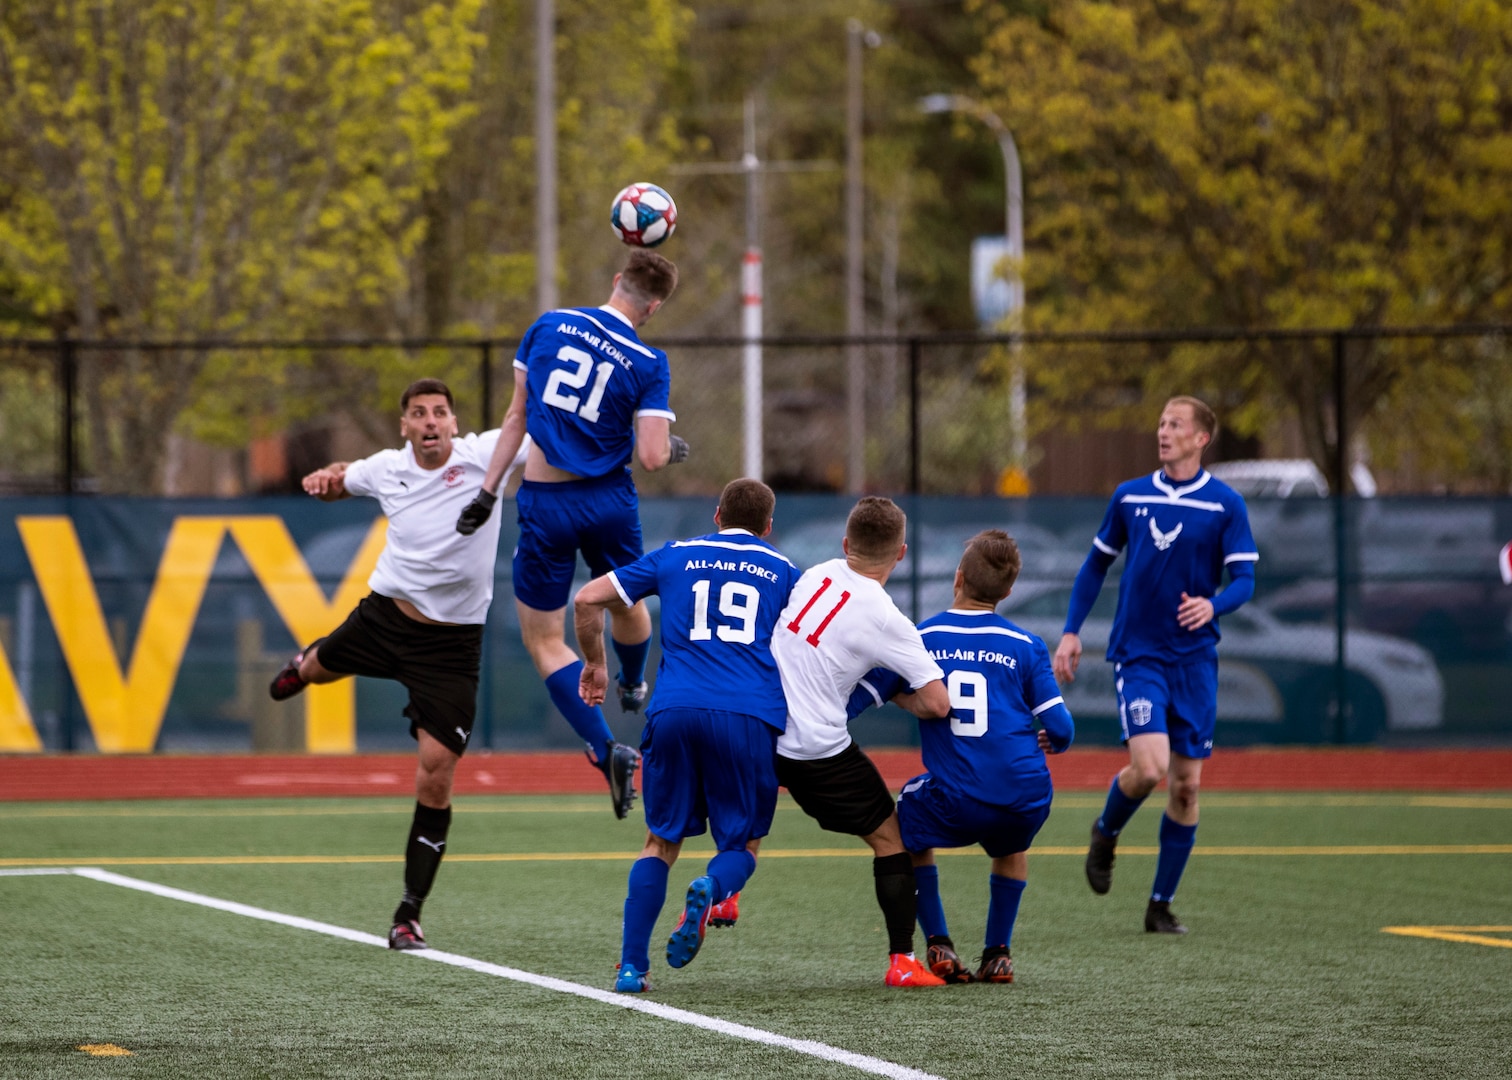 NAVAL STATION EVERETT, Wa. (April 16, 2019) - Airman 1st Class Austin Spagnola, stationed at Joint Base Lewis McChord, Wa., from the Air Force soccer team heads a ball away from players from the Marine Corp soccer team during a second round match of the Armed Forces Sports Men’s Soccer Championship hosted at Naval Station Everett. (U.S. Navy Photo by Mass Communication Specialist 2nd Class Ian Carver/RELEASED).